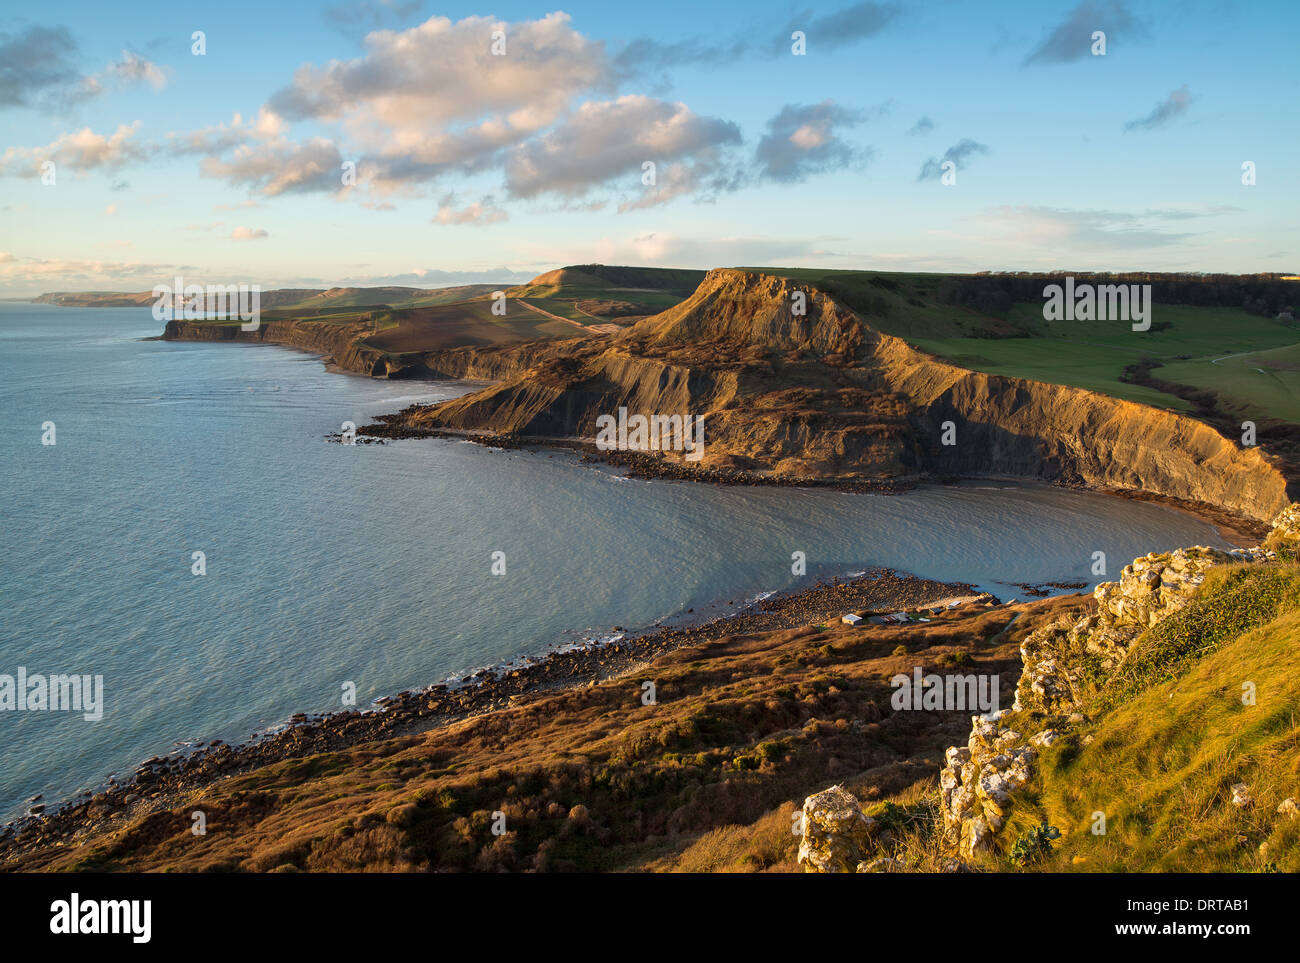 Fabulous late afternoon view across Chapman's Pool with the sun reflecting off the face of Houns-tout Cliff. Dorset, UK Stock Photo